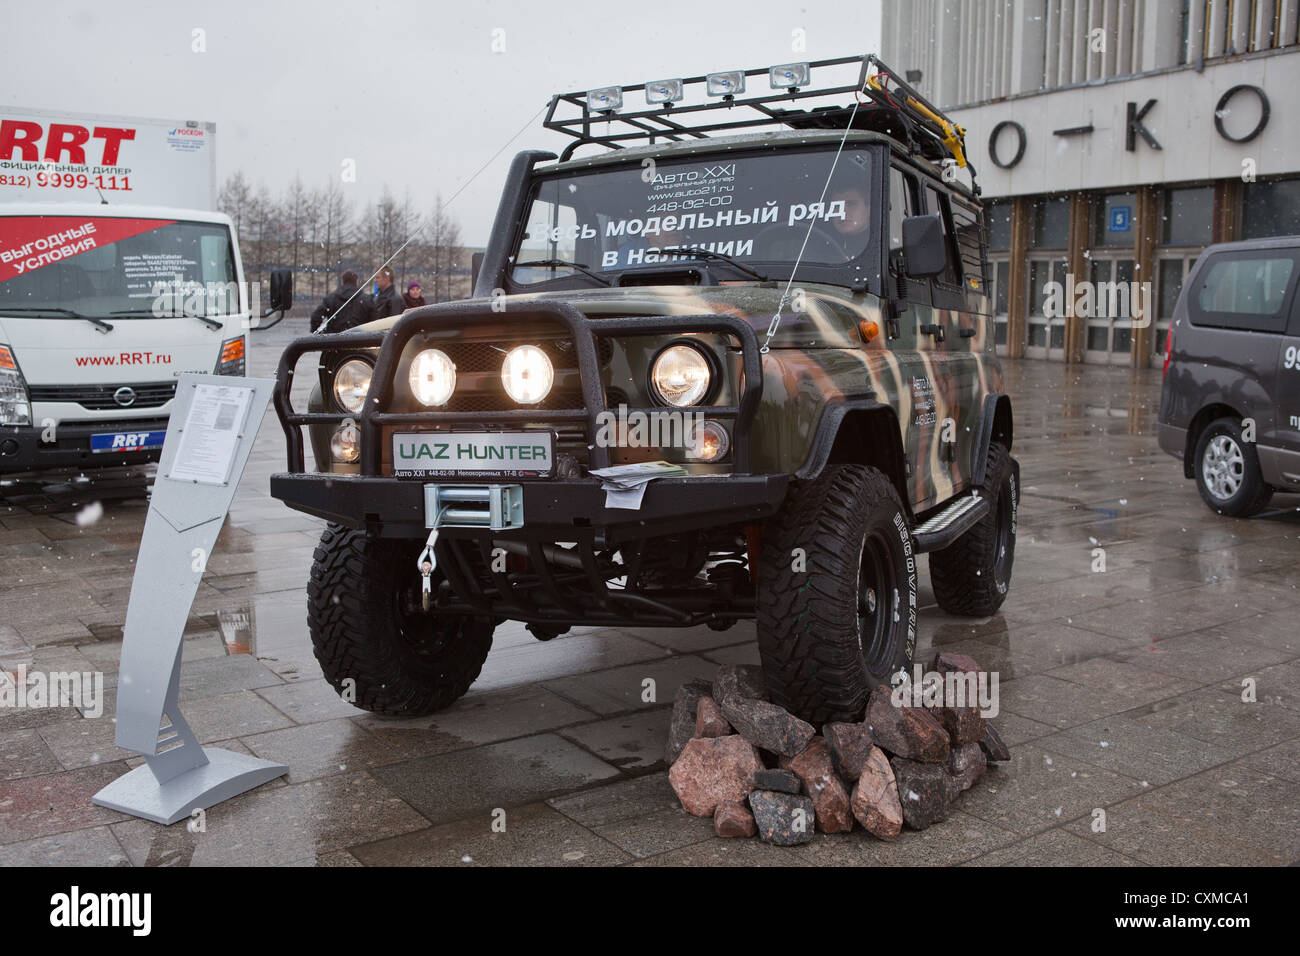 UAZ Hunter on exhibition near Sport Concert Arena, on circa March, 2012 in Saint-Petersburg, Russia Stock Photo